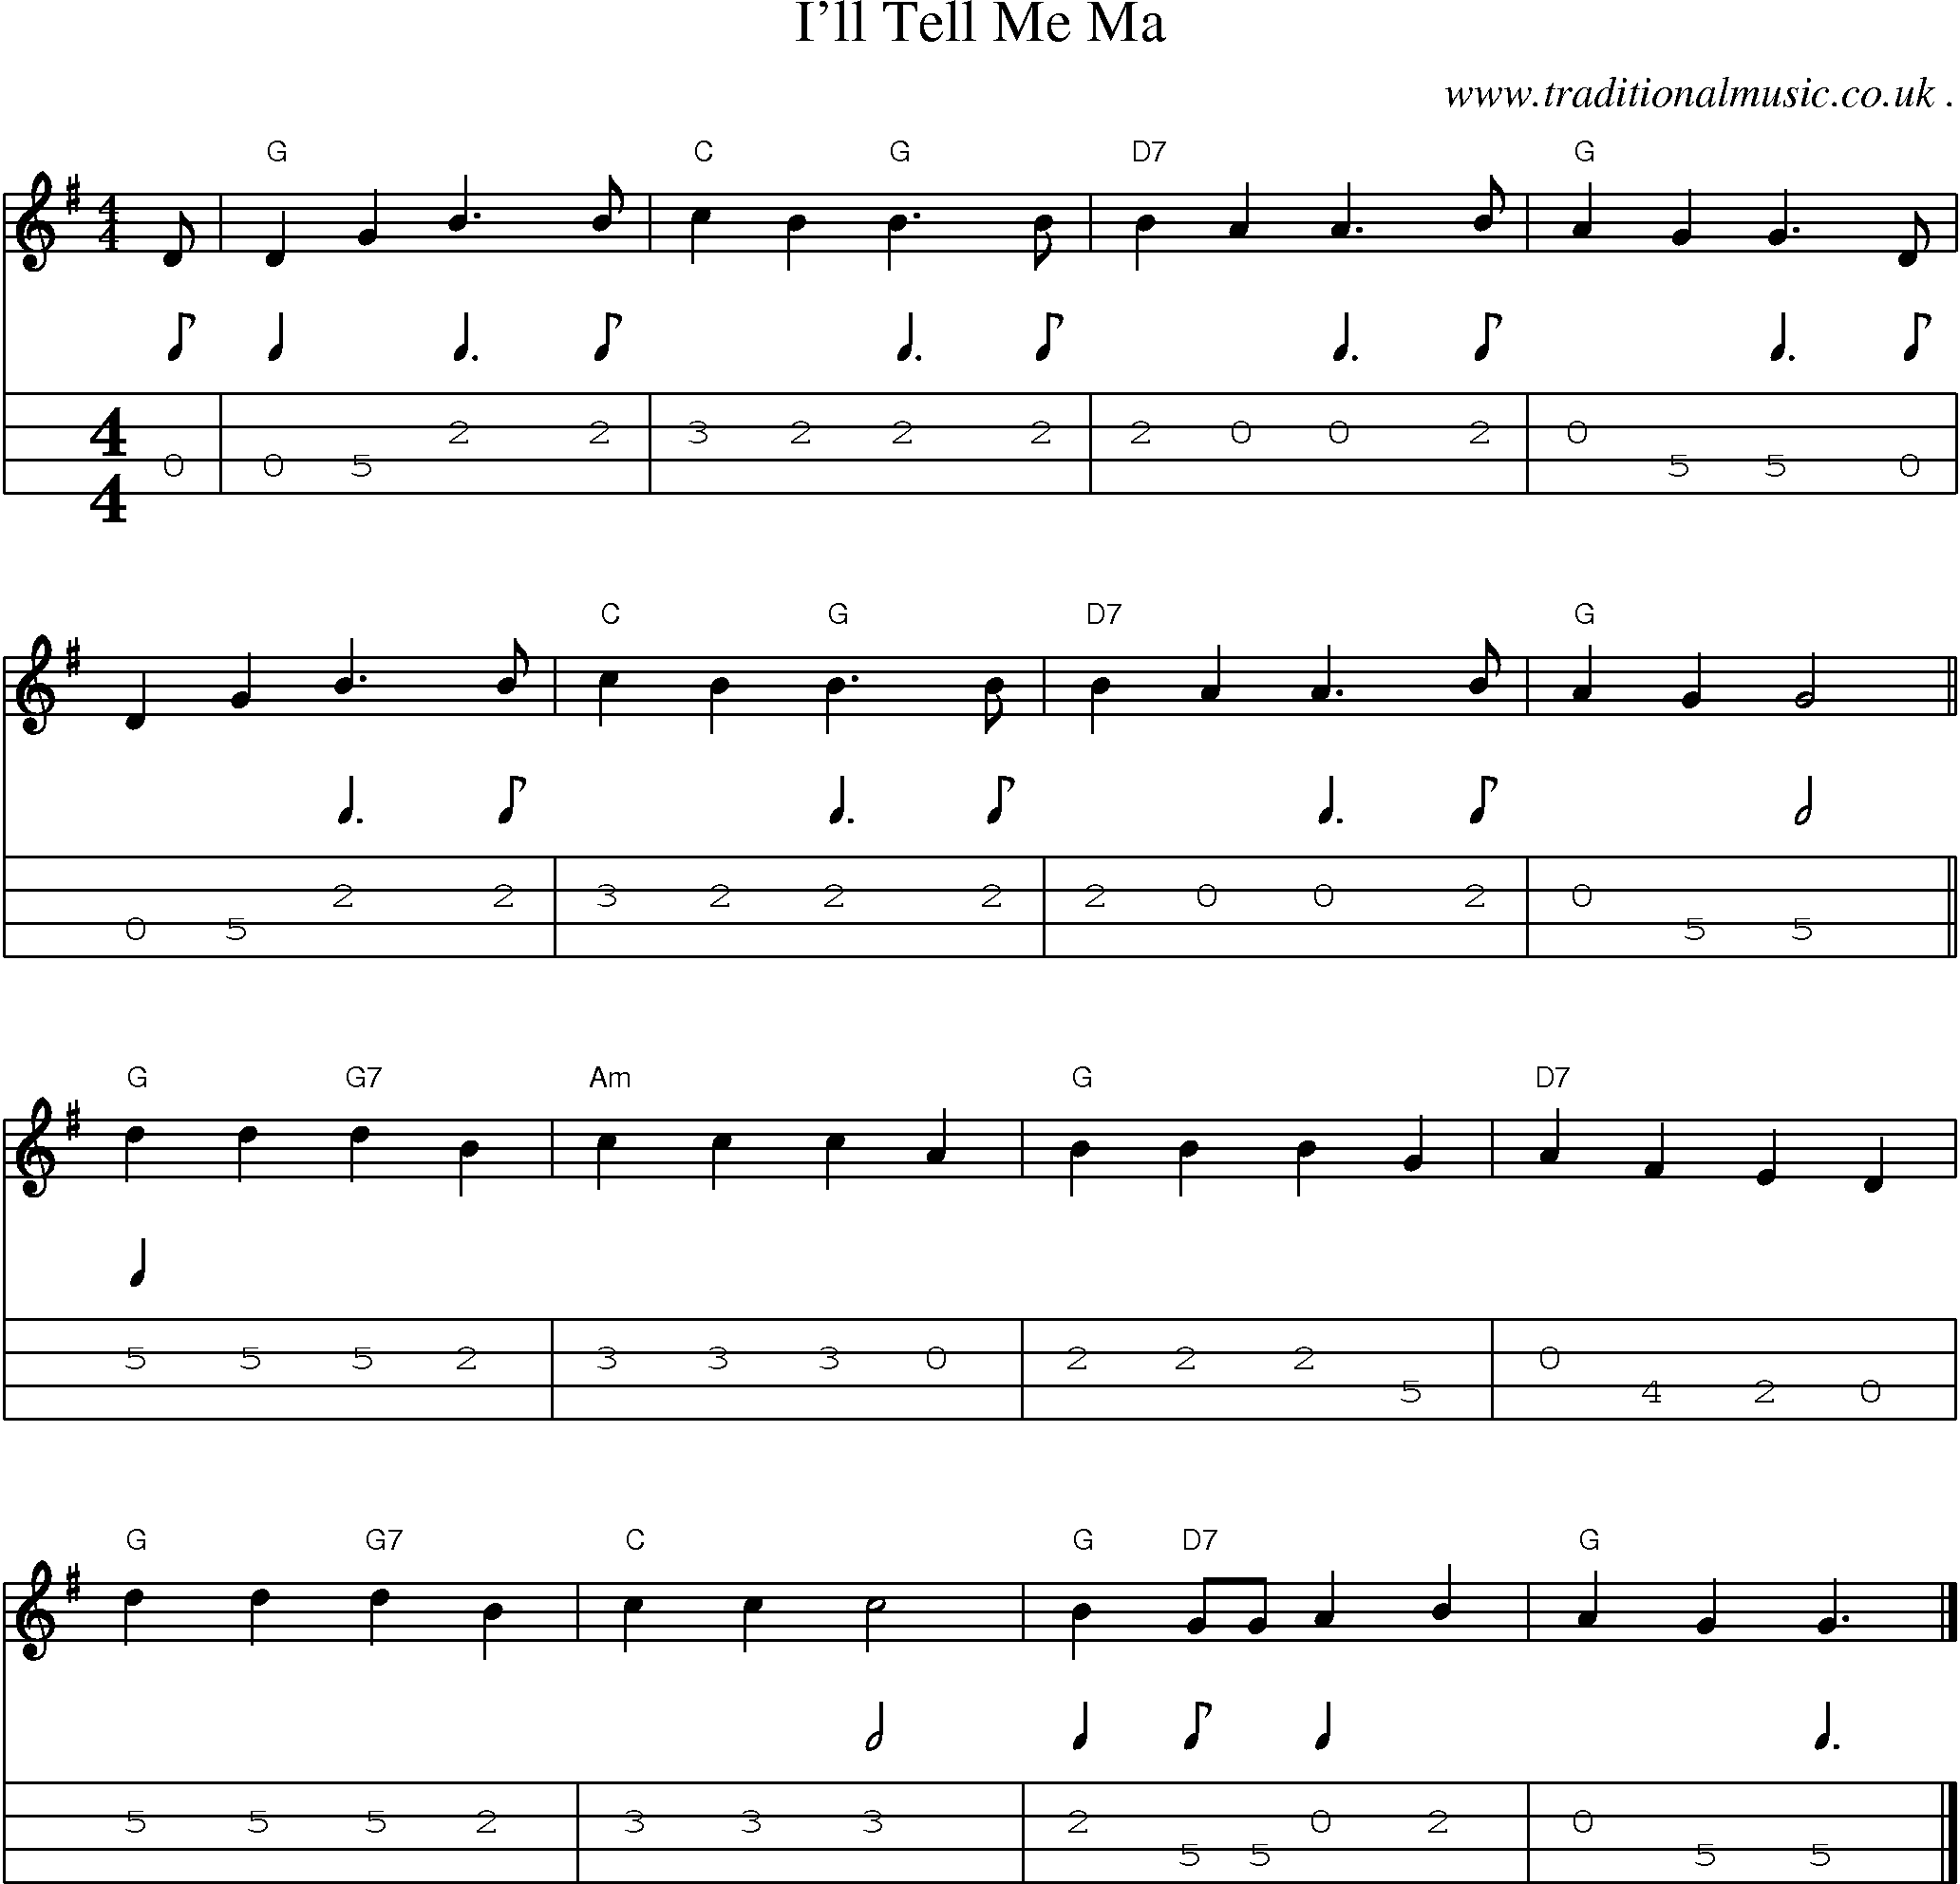 Music Score and Guitar Tabs for Ill Tell Me Ma